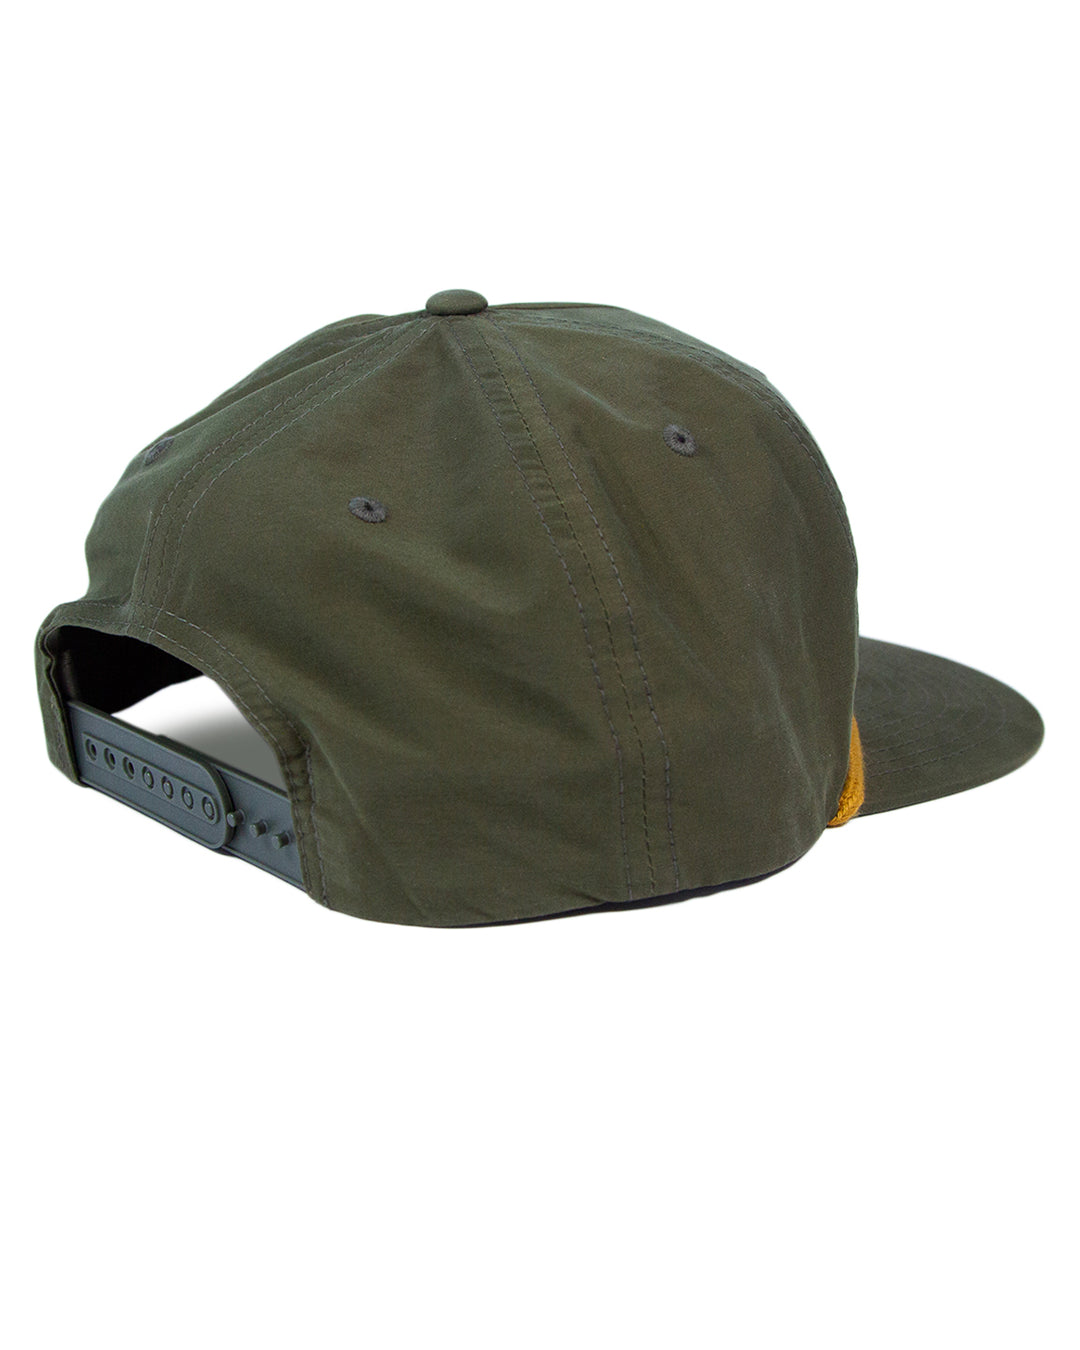 MuskOx Outdoor Apparel, Green Rope and Patch Hat with Gold Accents